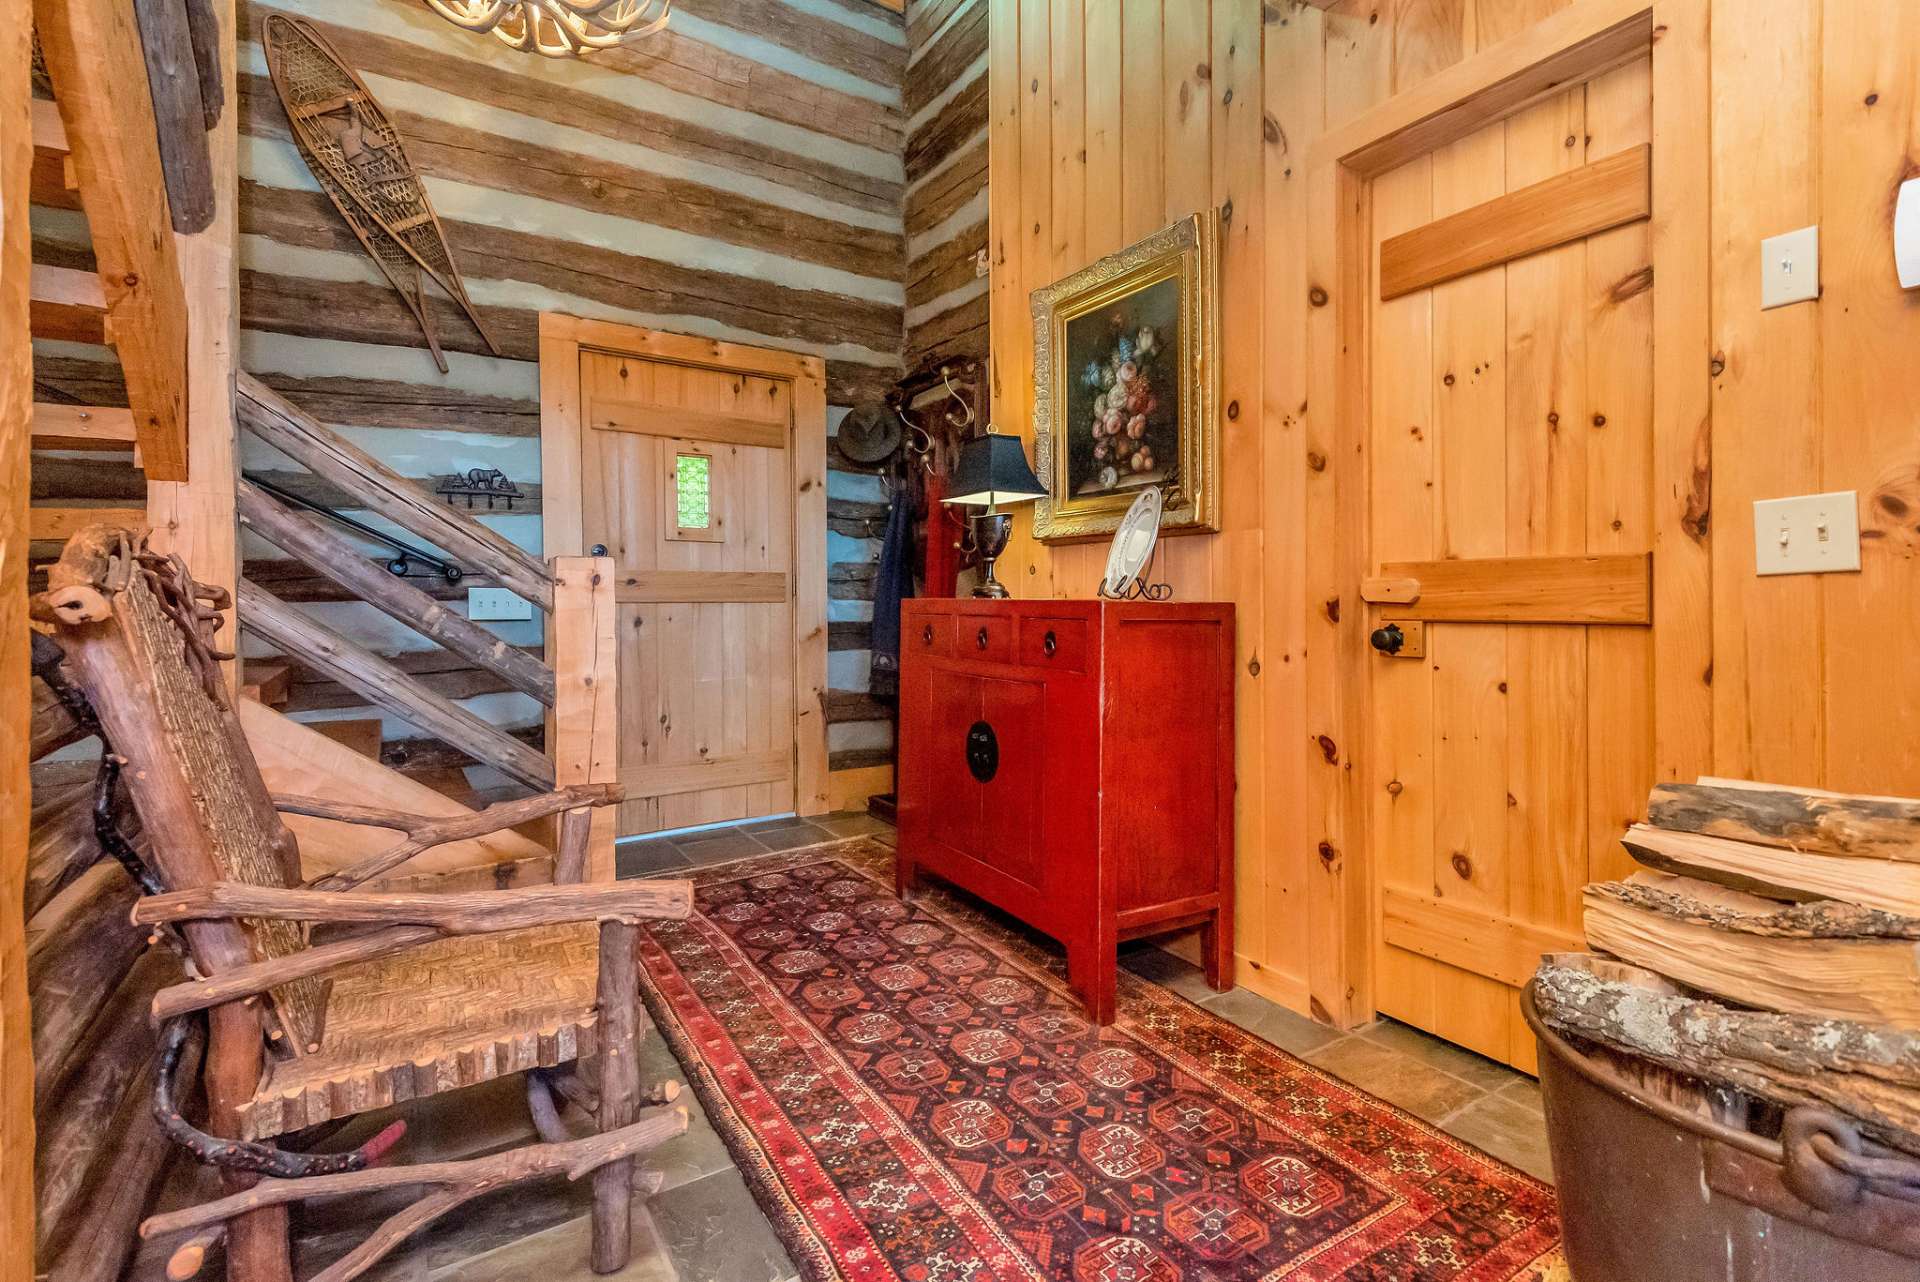 Greet family and friends in the 2-story foyer which leads to all three levels of this unique cabin.